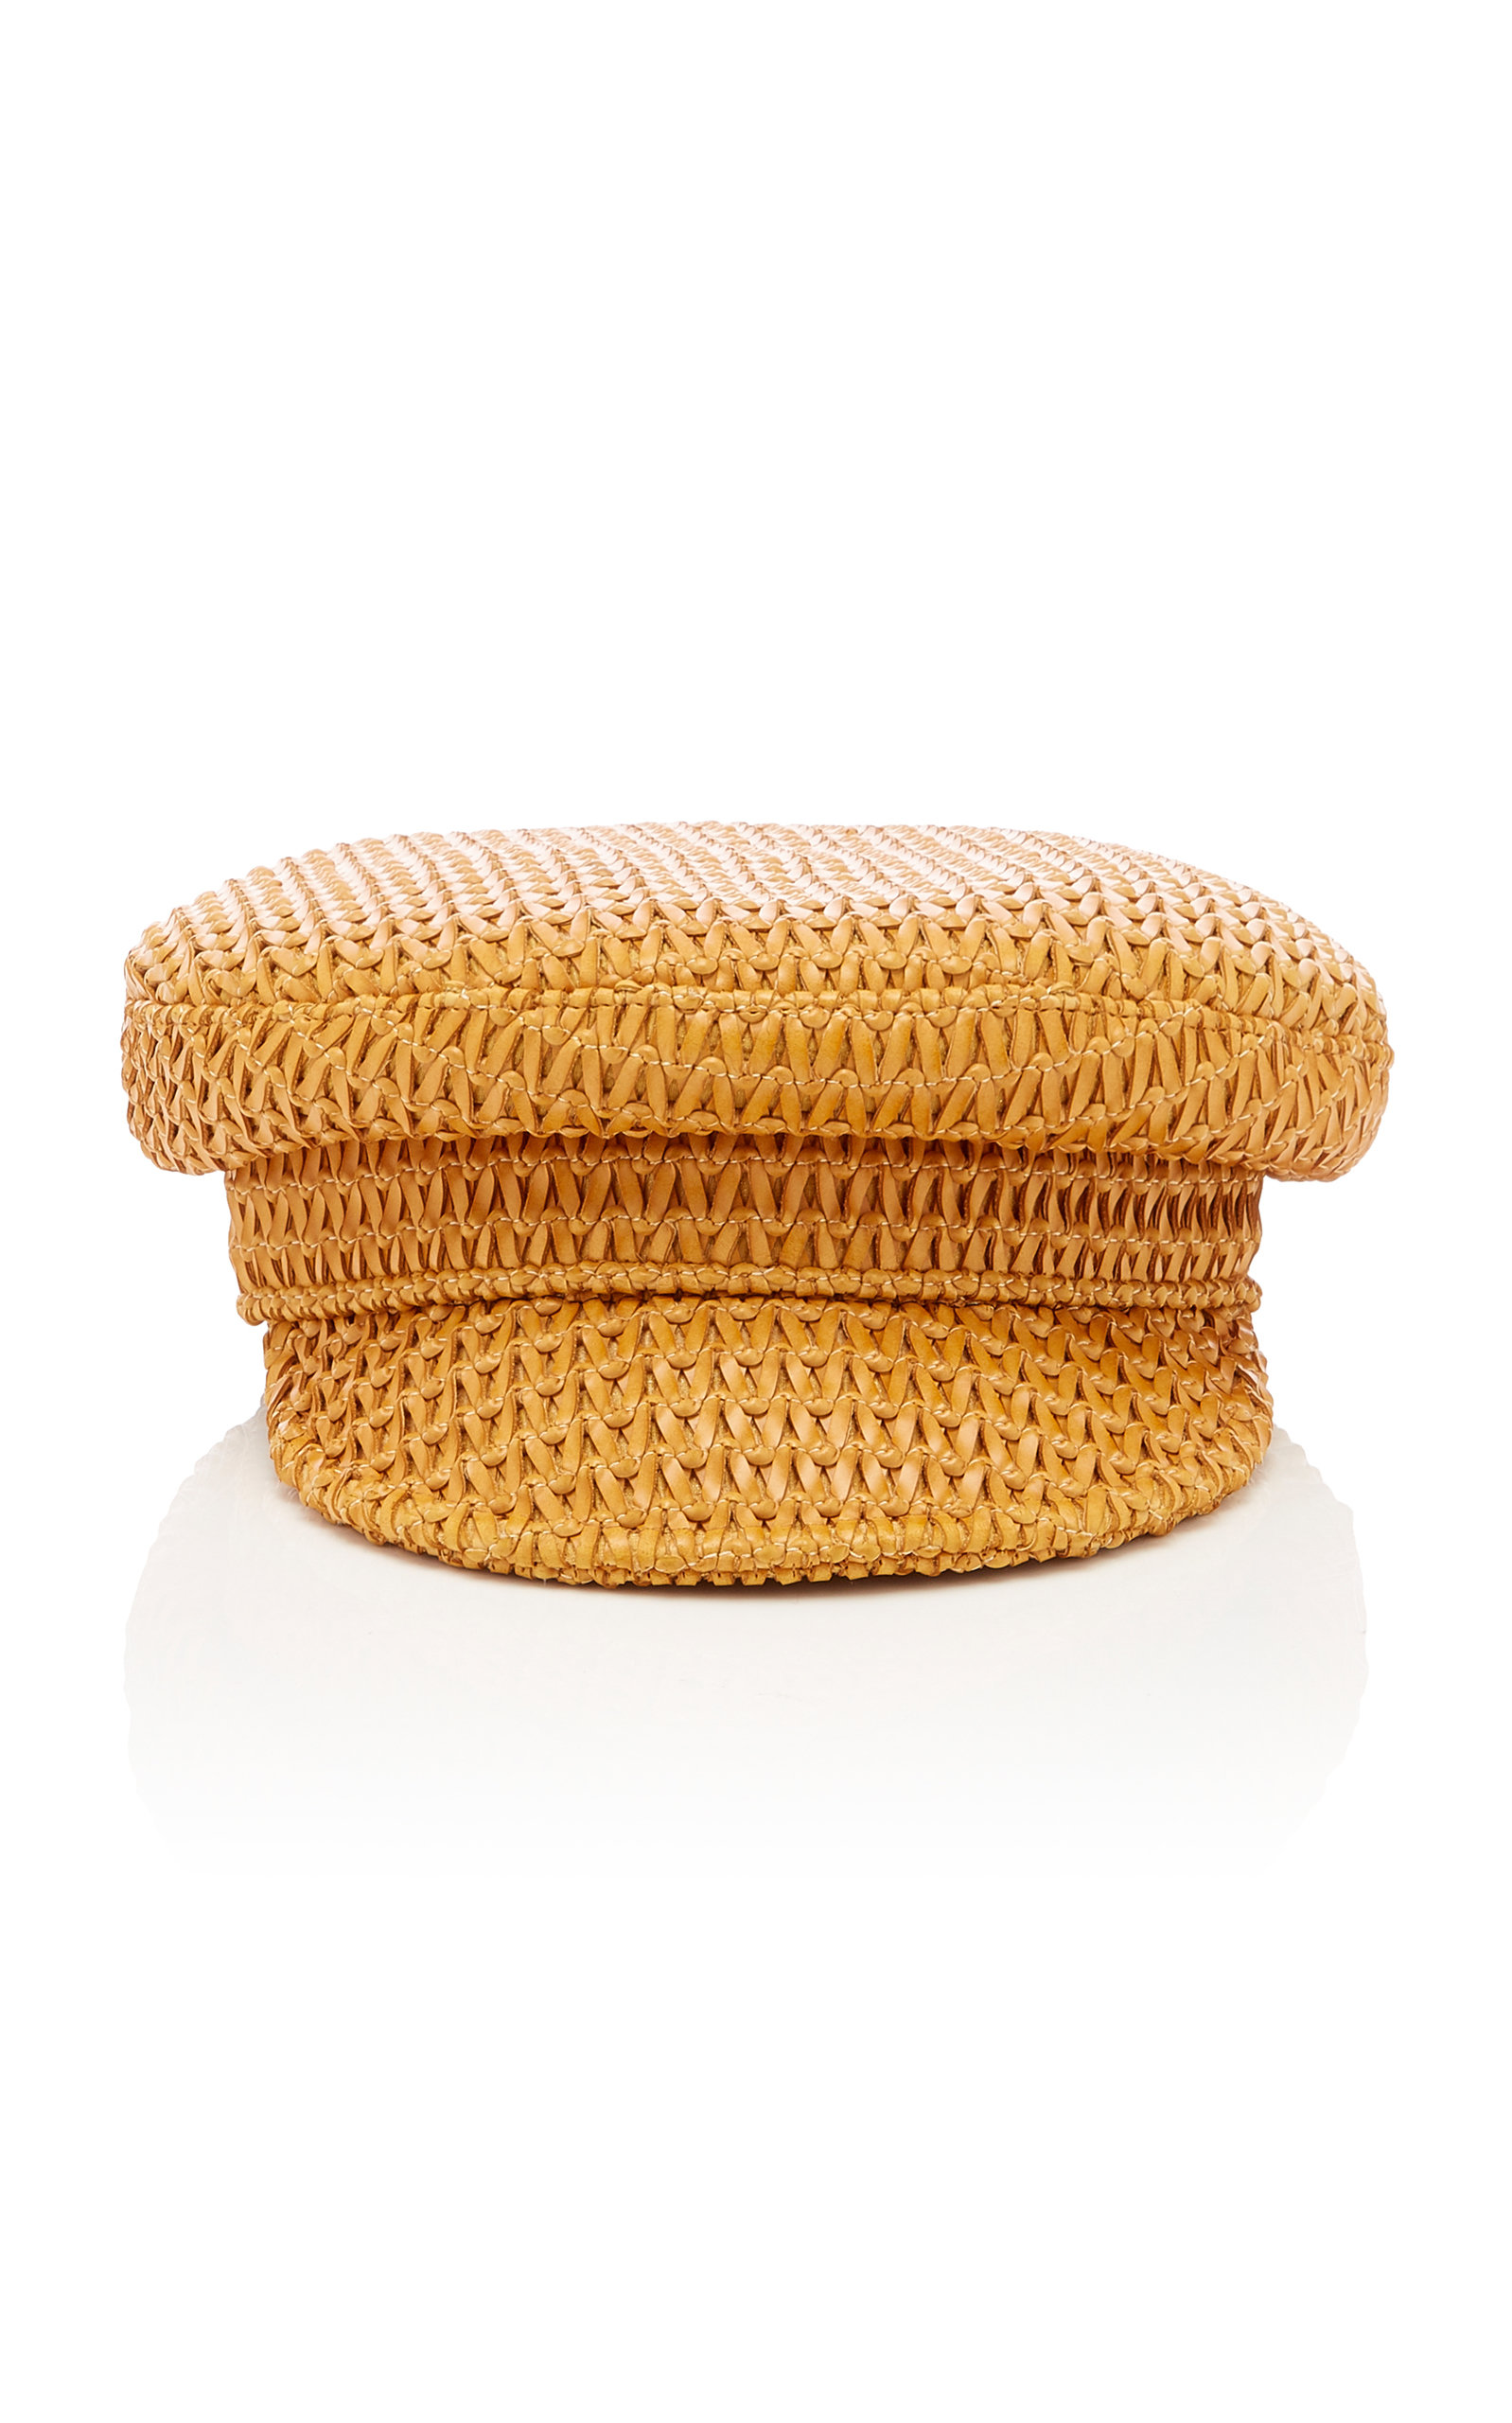 large_lack-of-color-brown-mesa-woven-leather-cap.jpg